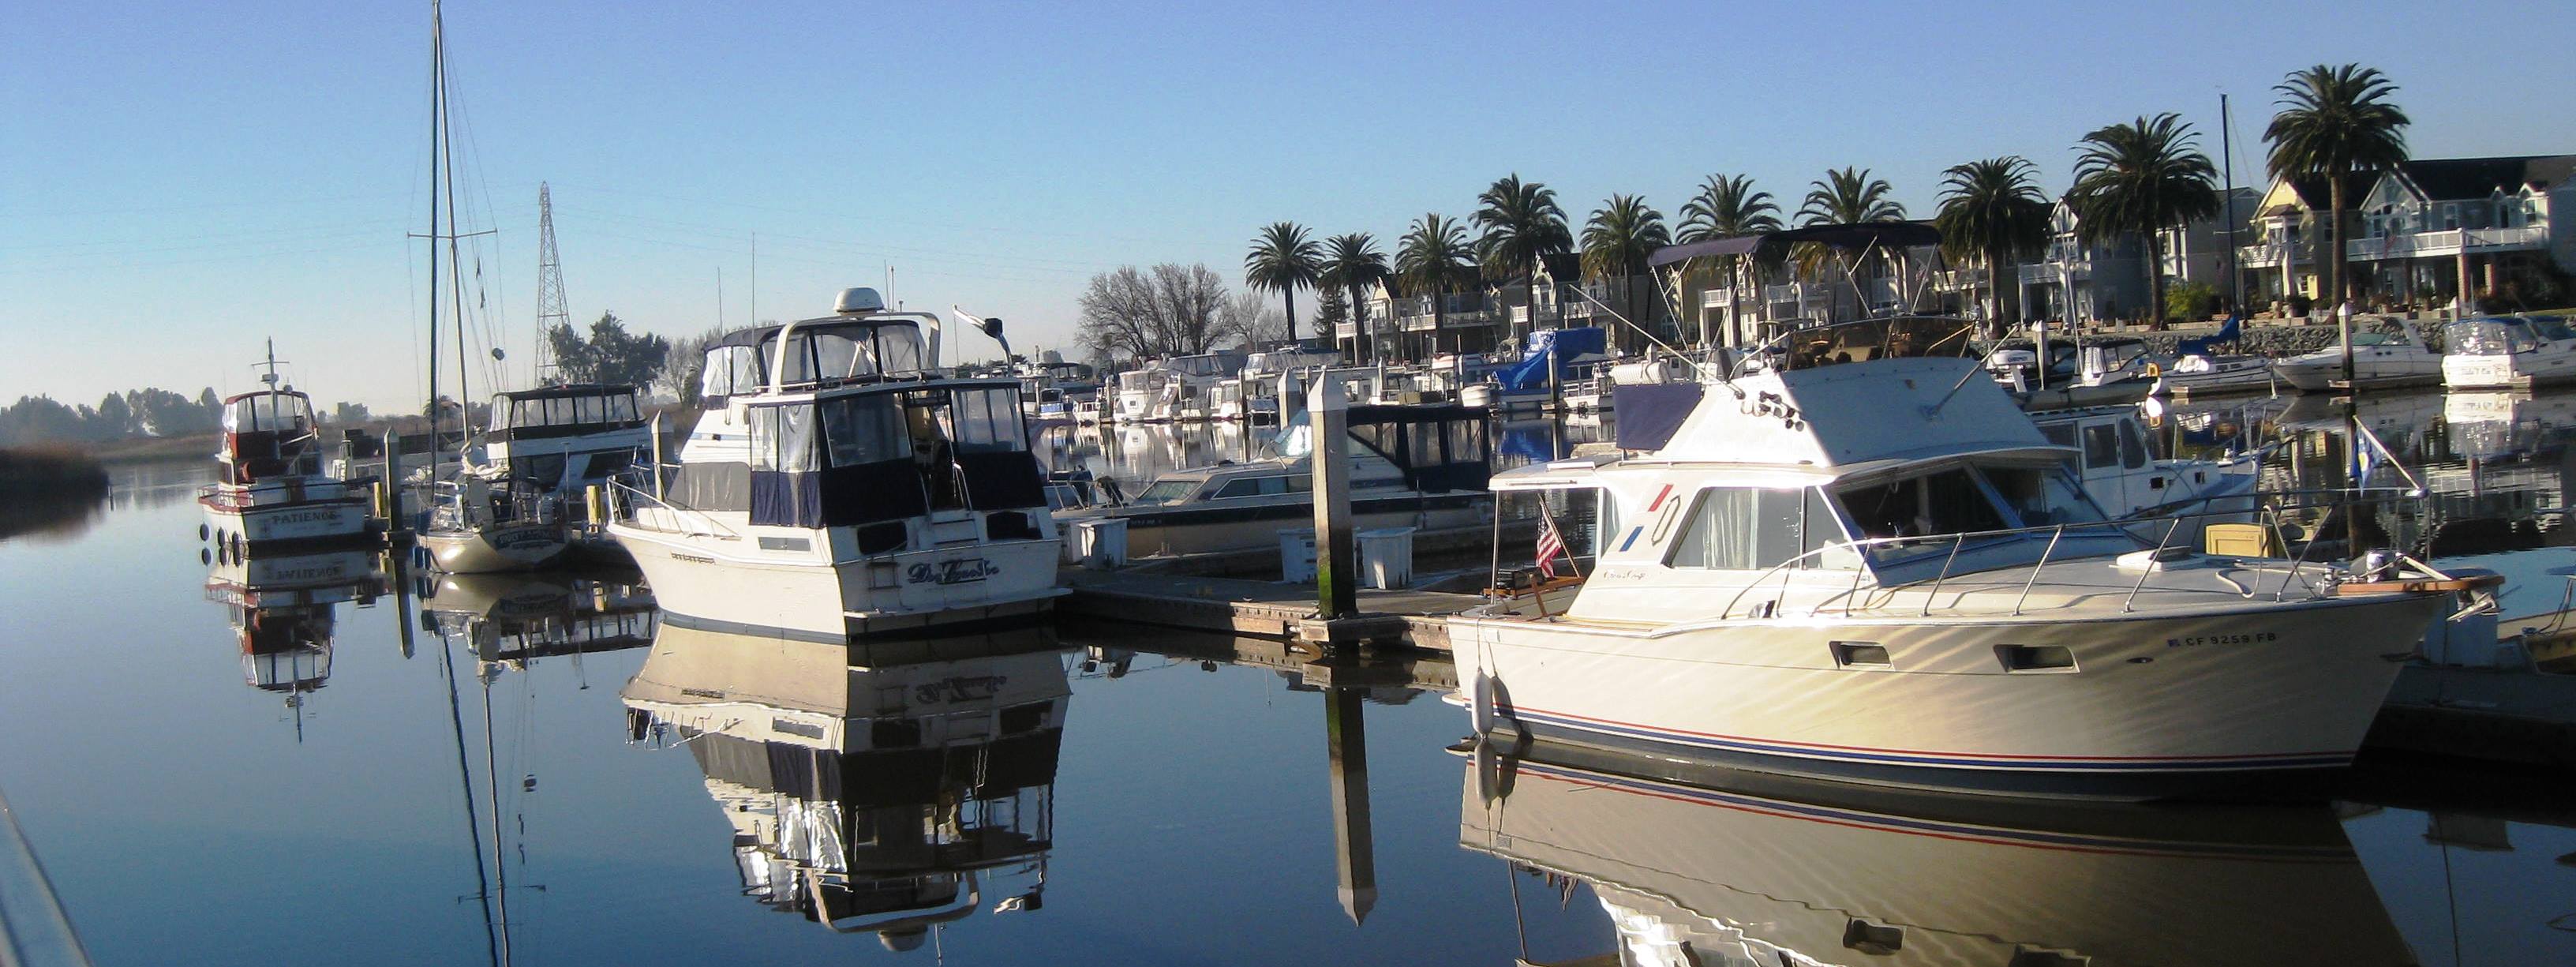 our-boats-on-the-guest-dock-cropped